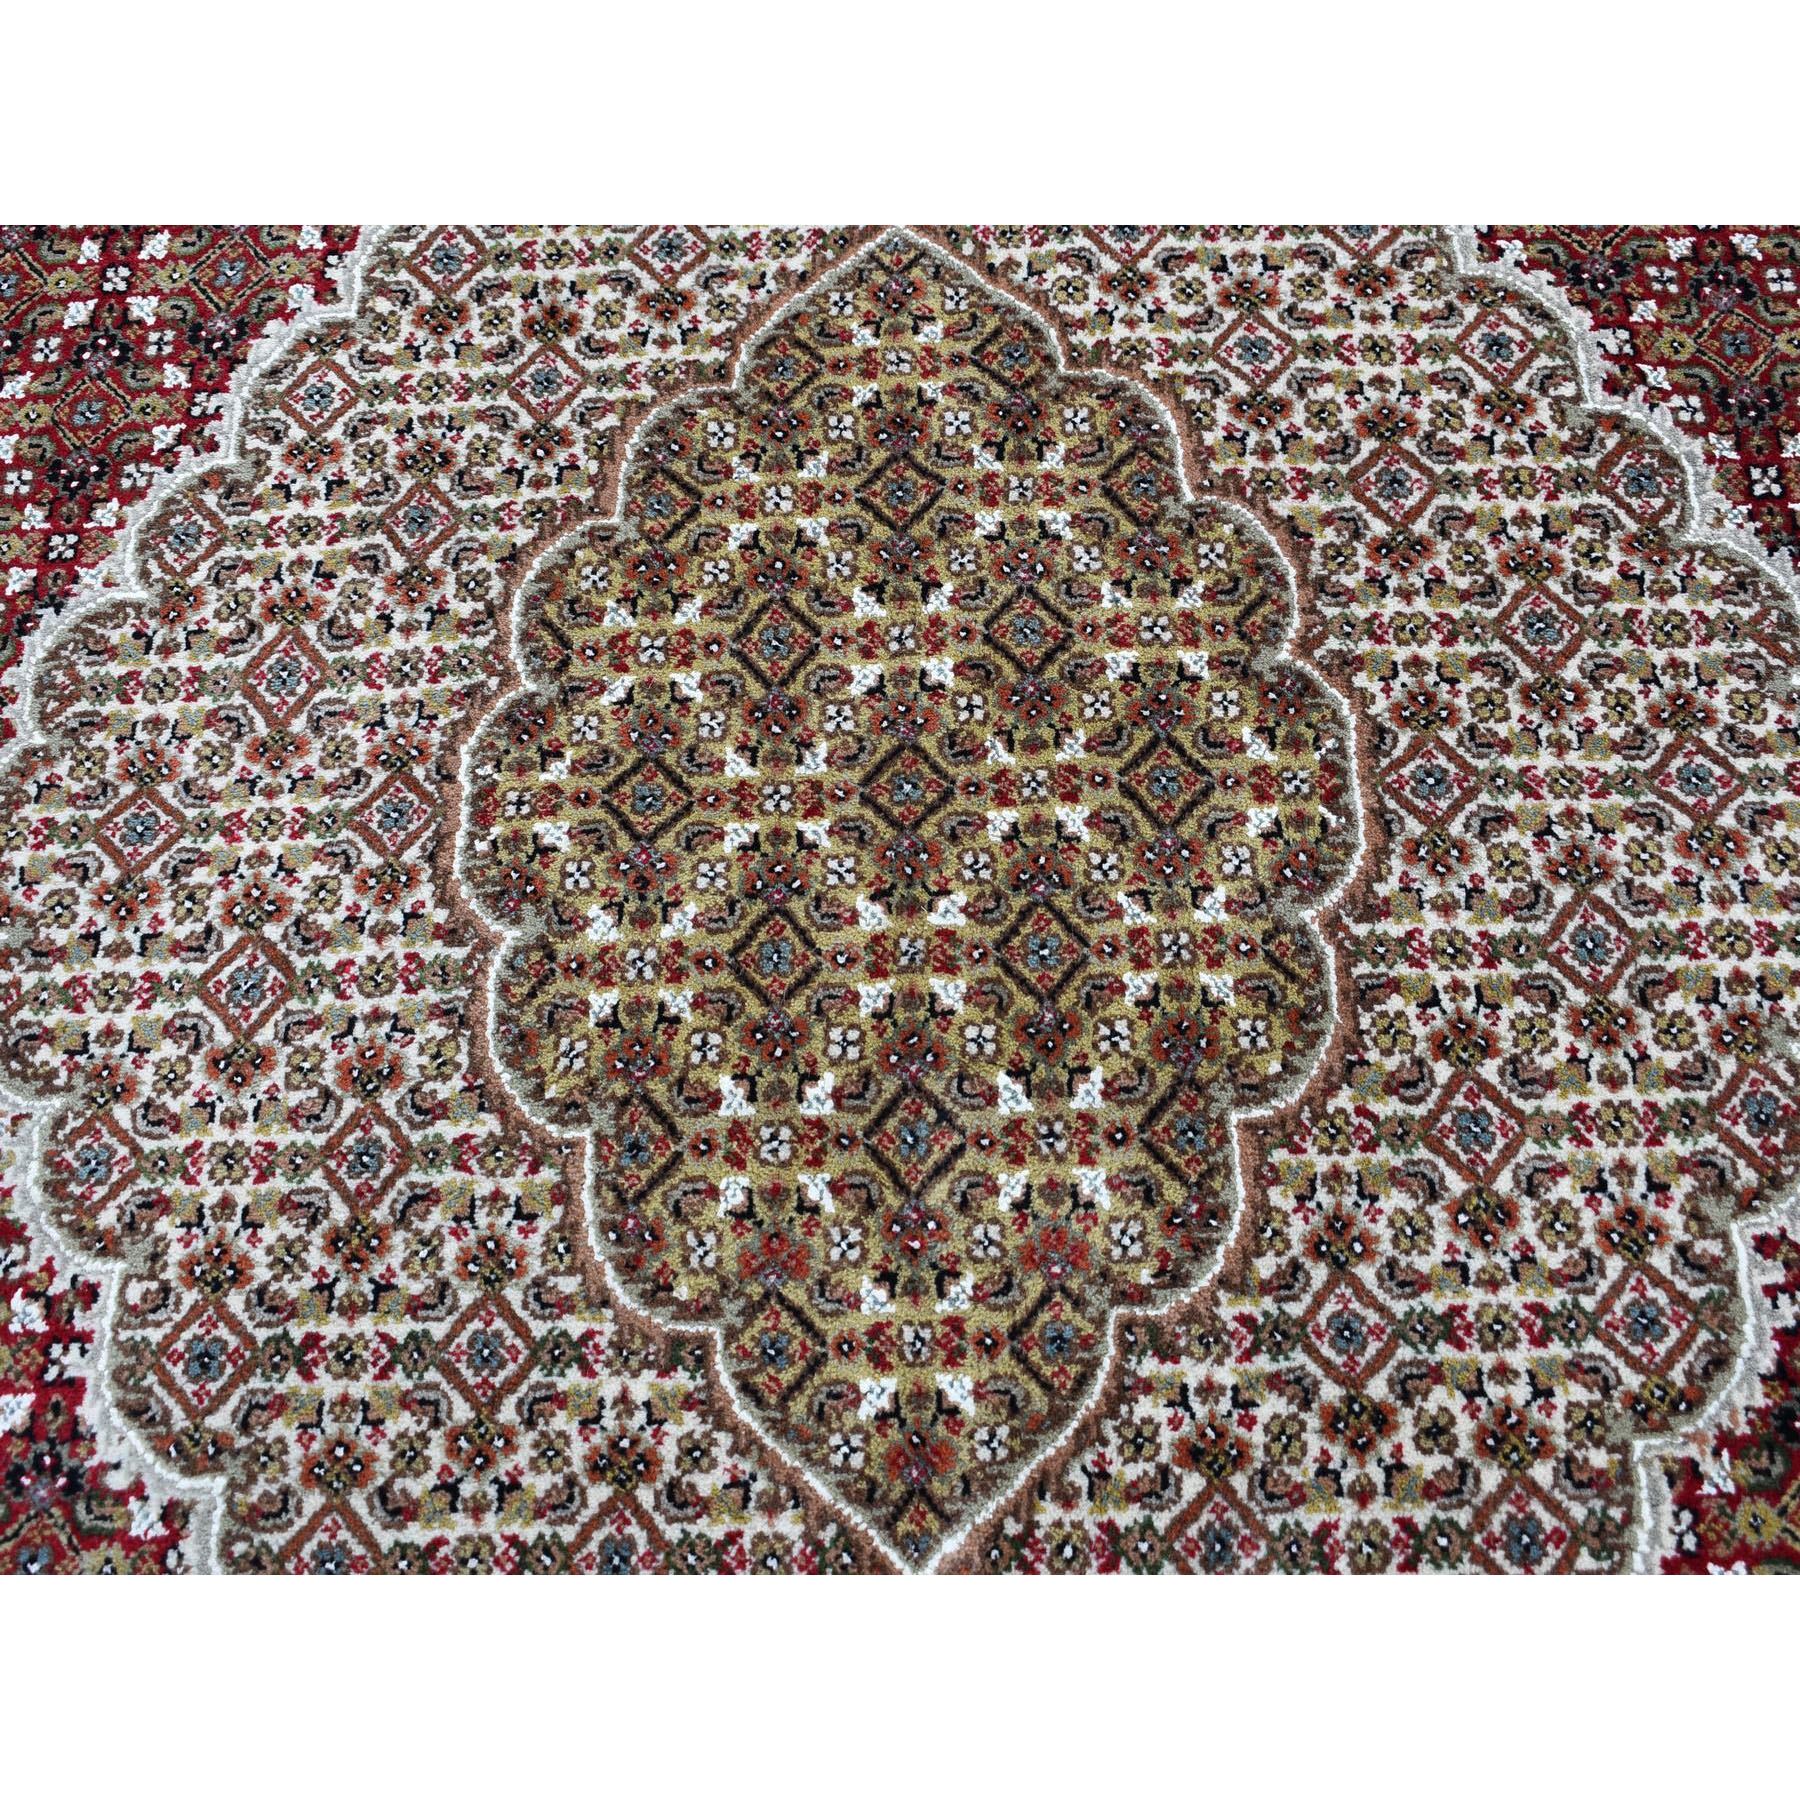 10-x14-2  Red Tabriz Mahi Fish Design Wool and Silk Hand Knotted Oriental Rug 